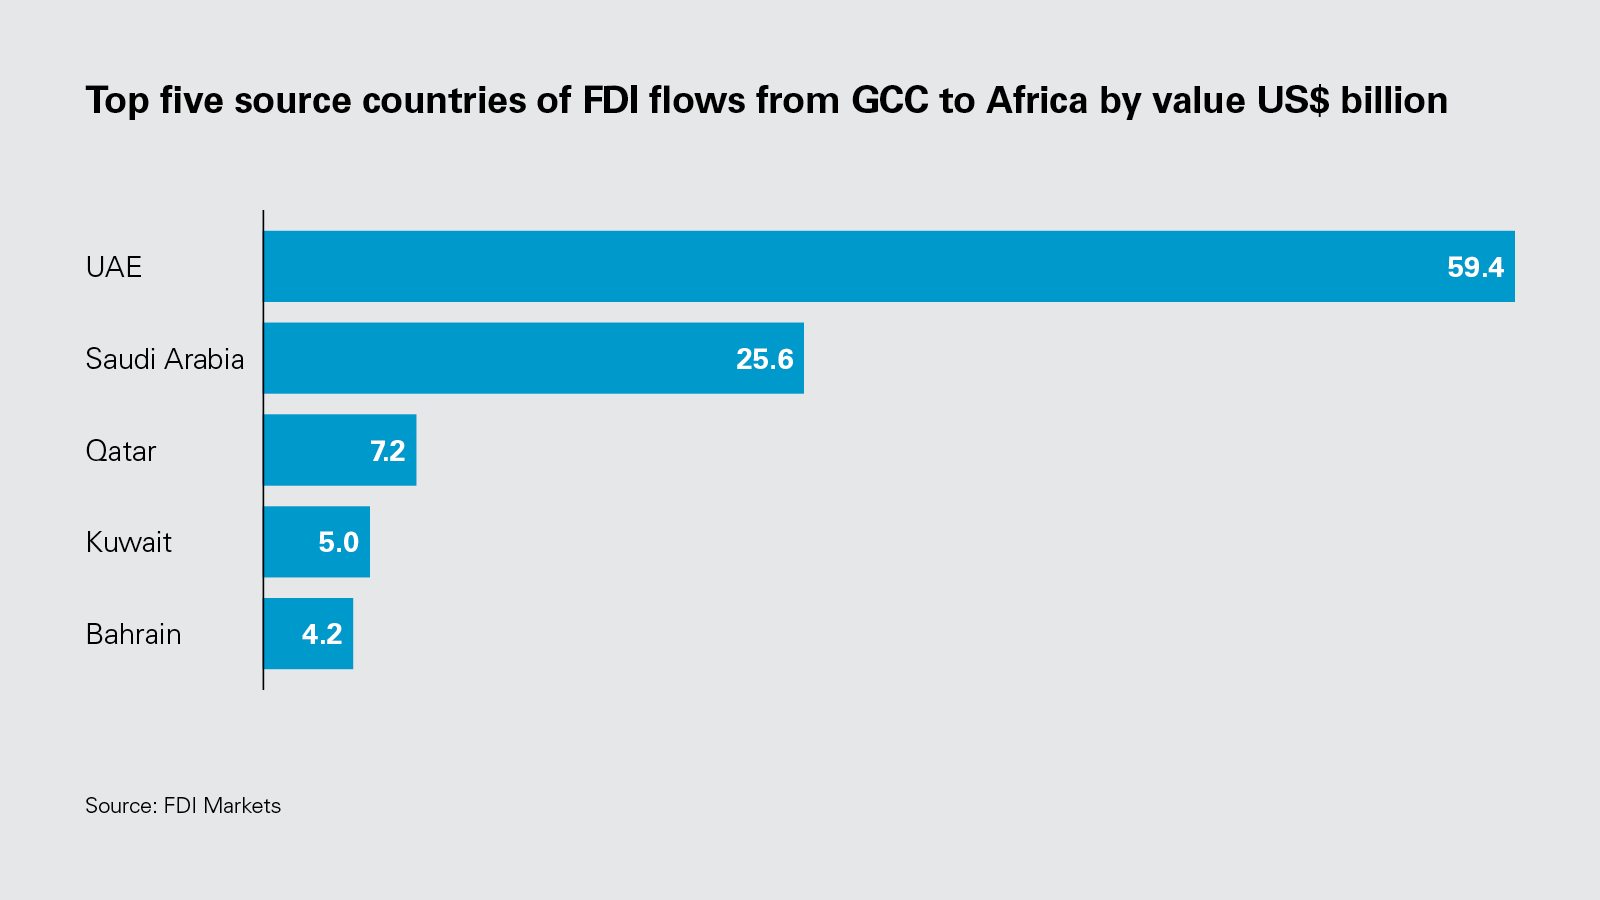 Top five source countries of FDI flows from GCC to Africa by value US$ billion